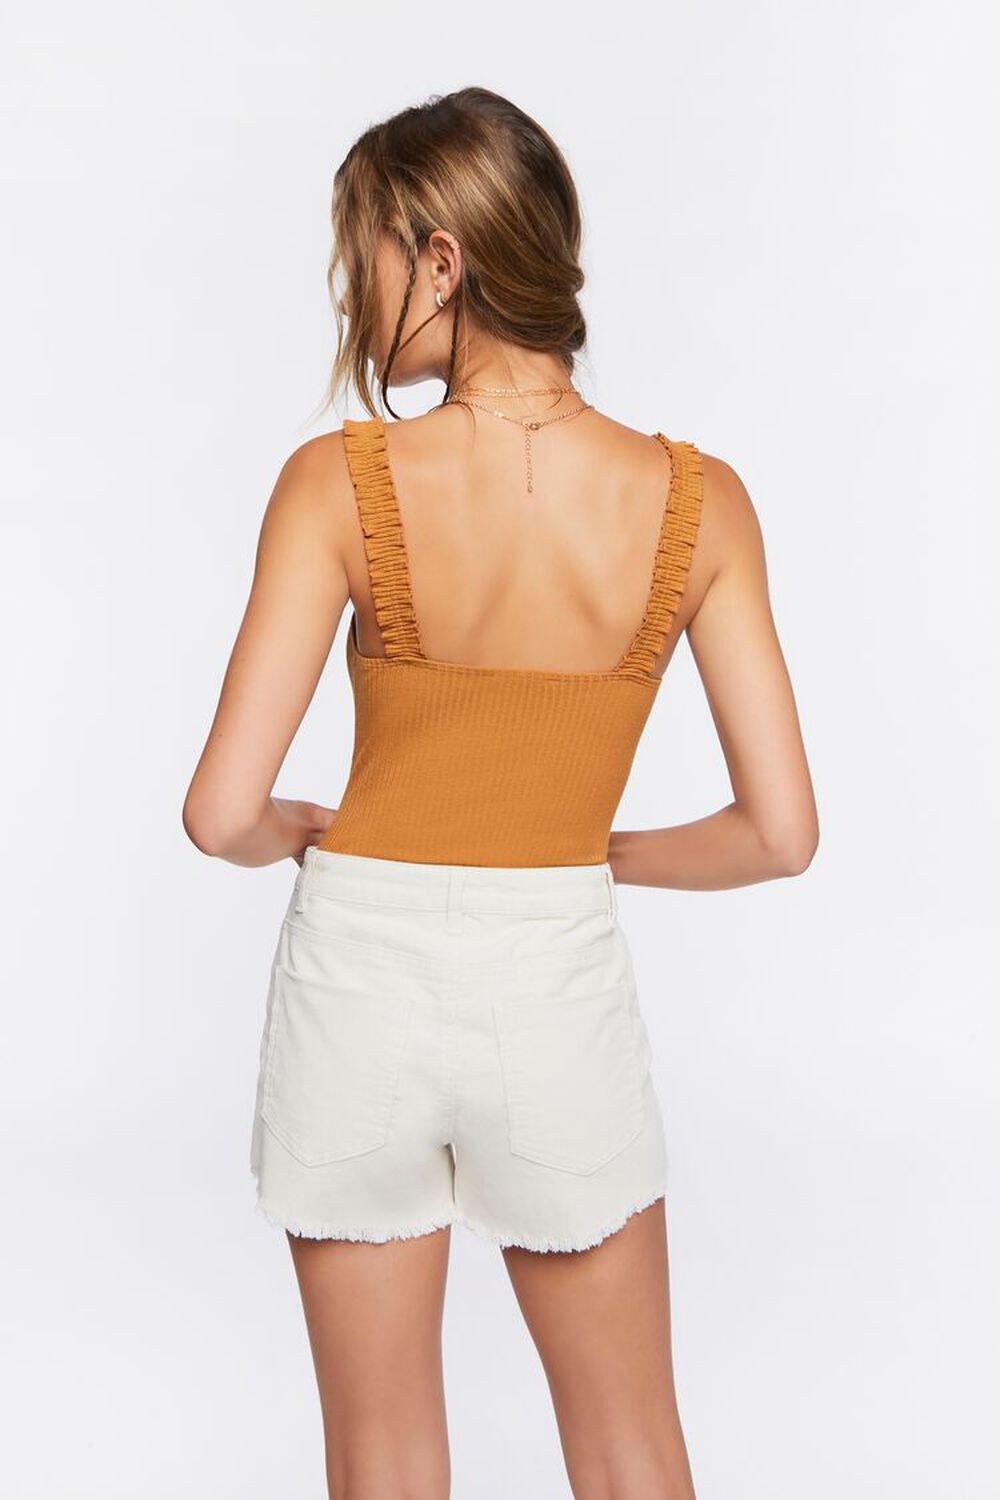 MAPLE Ruched-Strap Ribbed Bodysuit, image 3